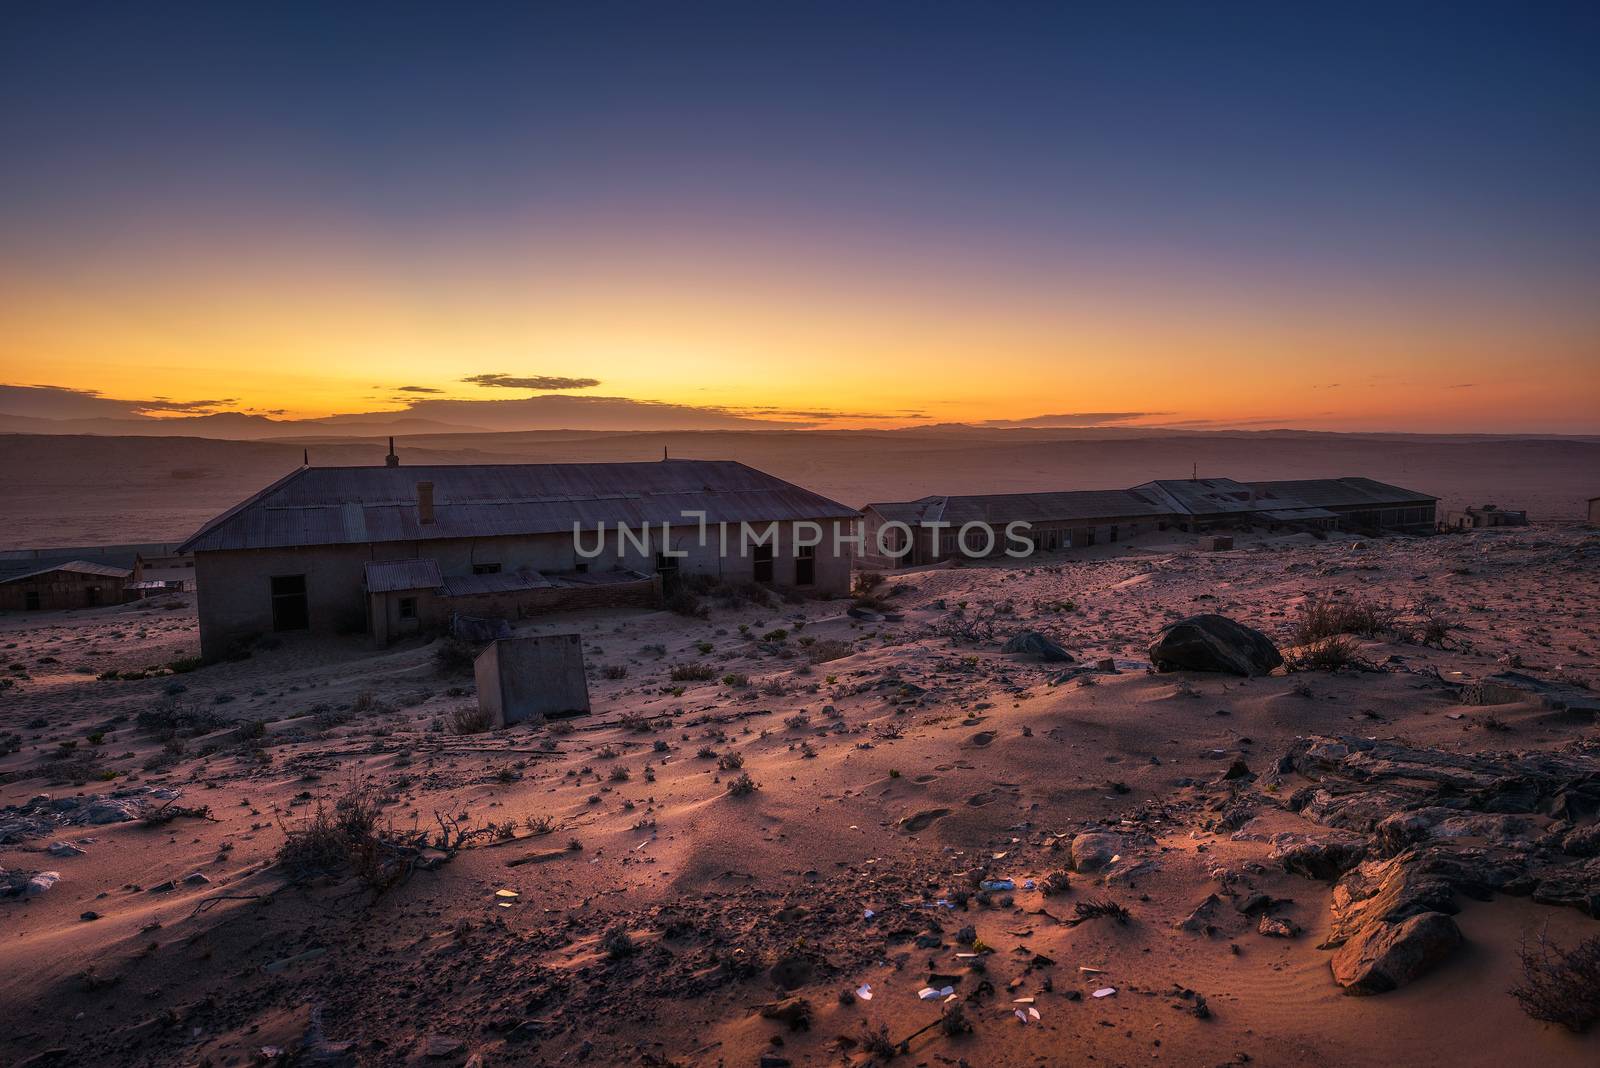 Sunrise above the abandoned houses of Kolmanskop ghost town, Namibia. by nickfox